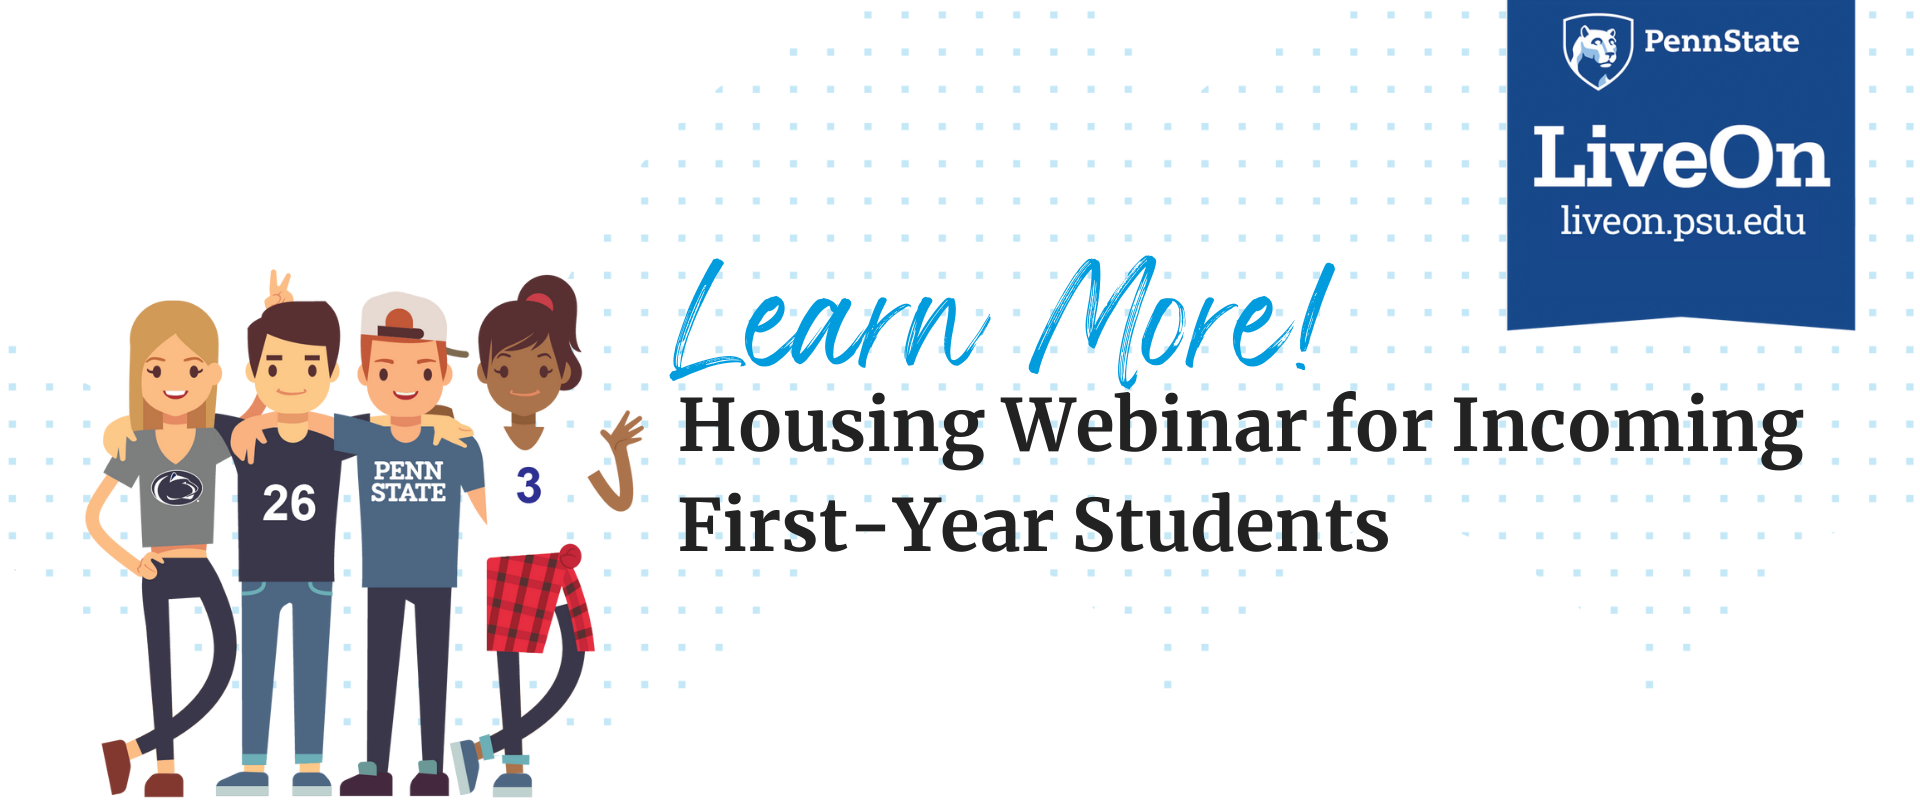 illustration of 4 students overlaid with text that says "Learn More - Housing Webinars for incoming first-year students"